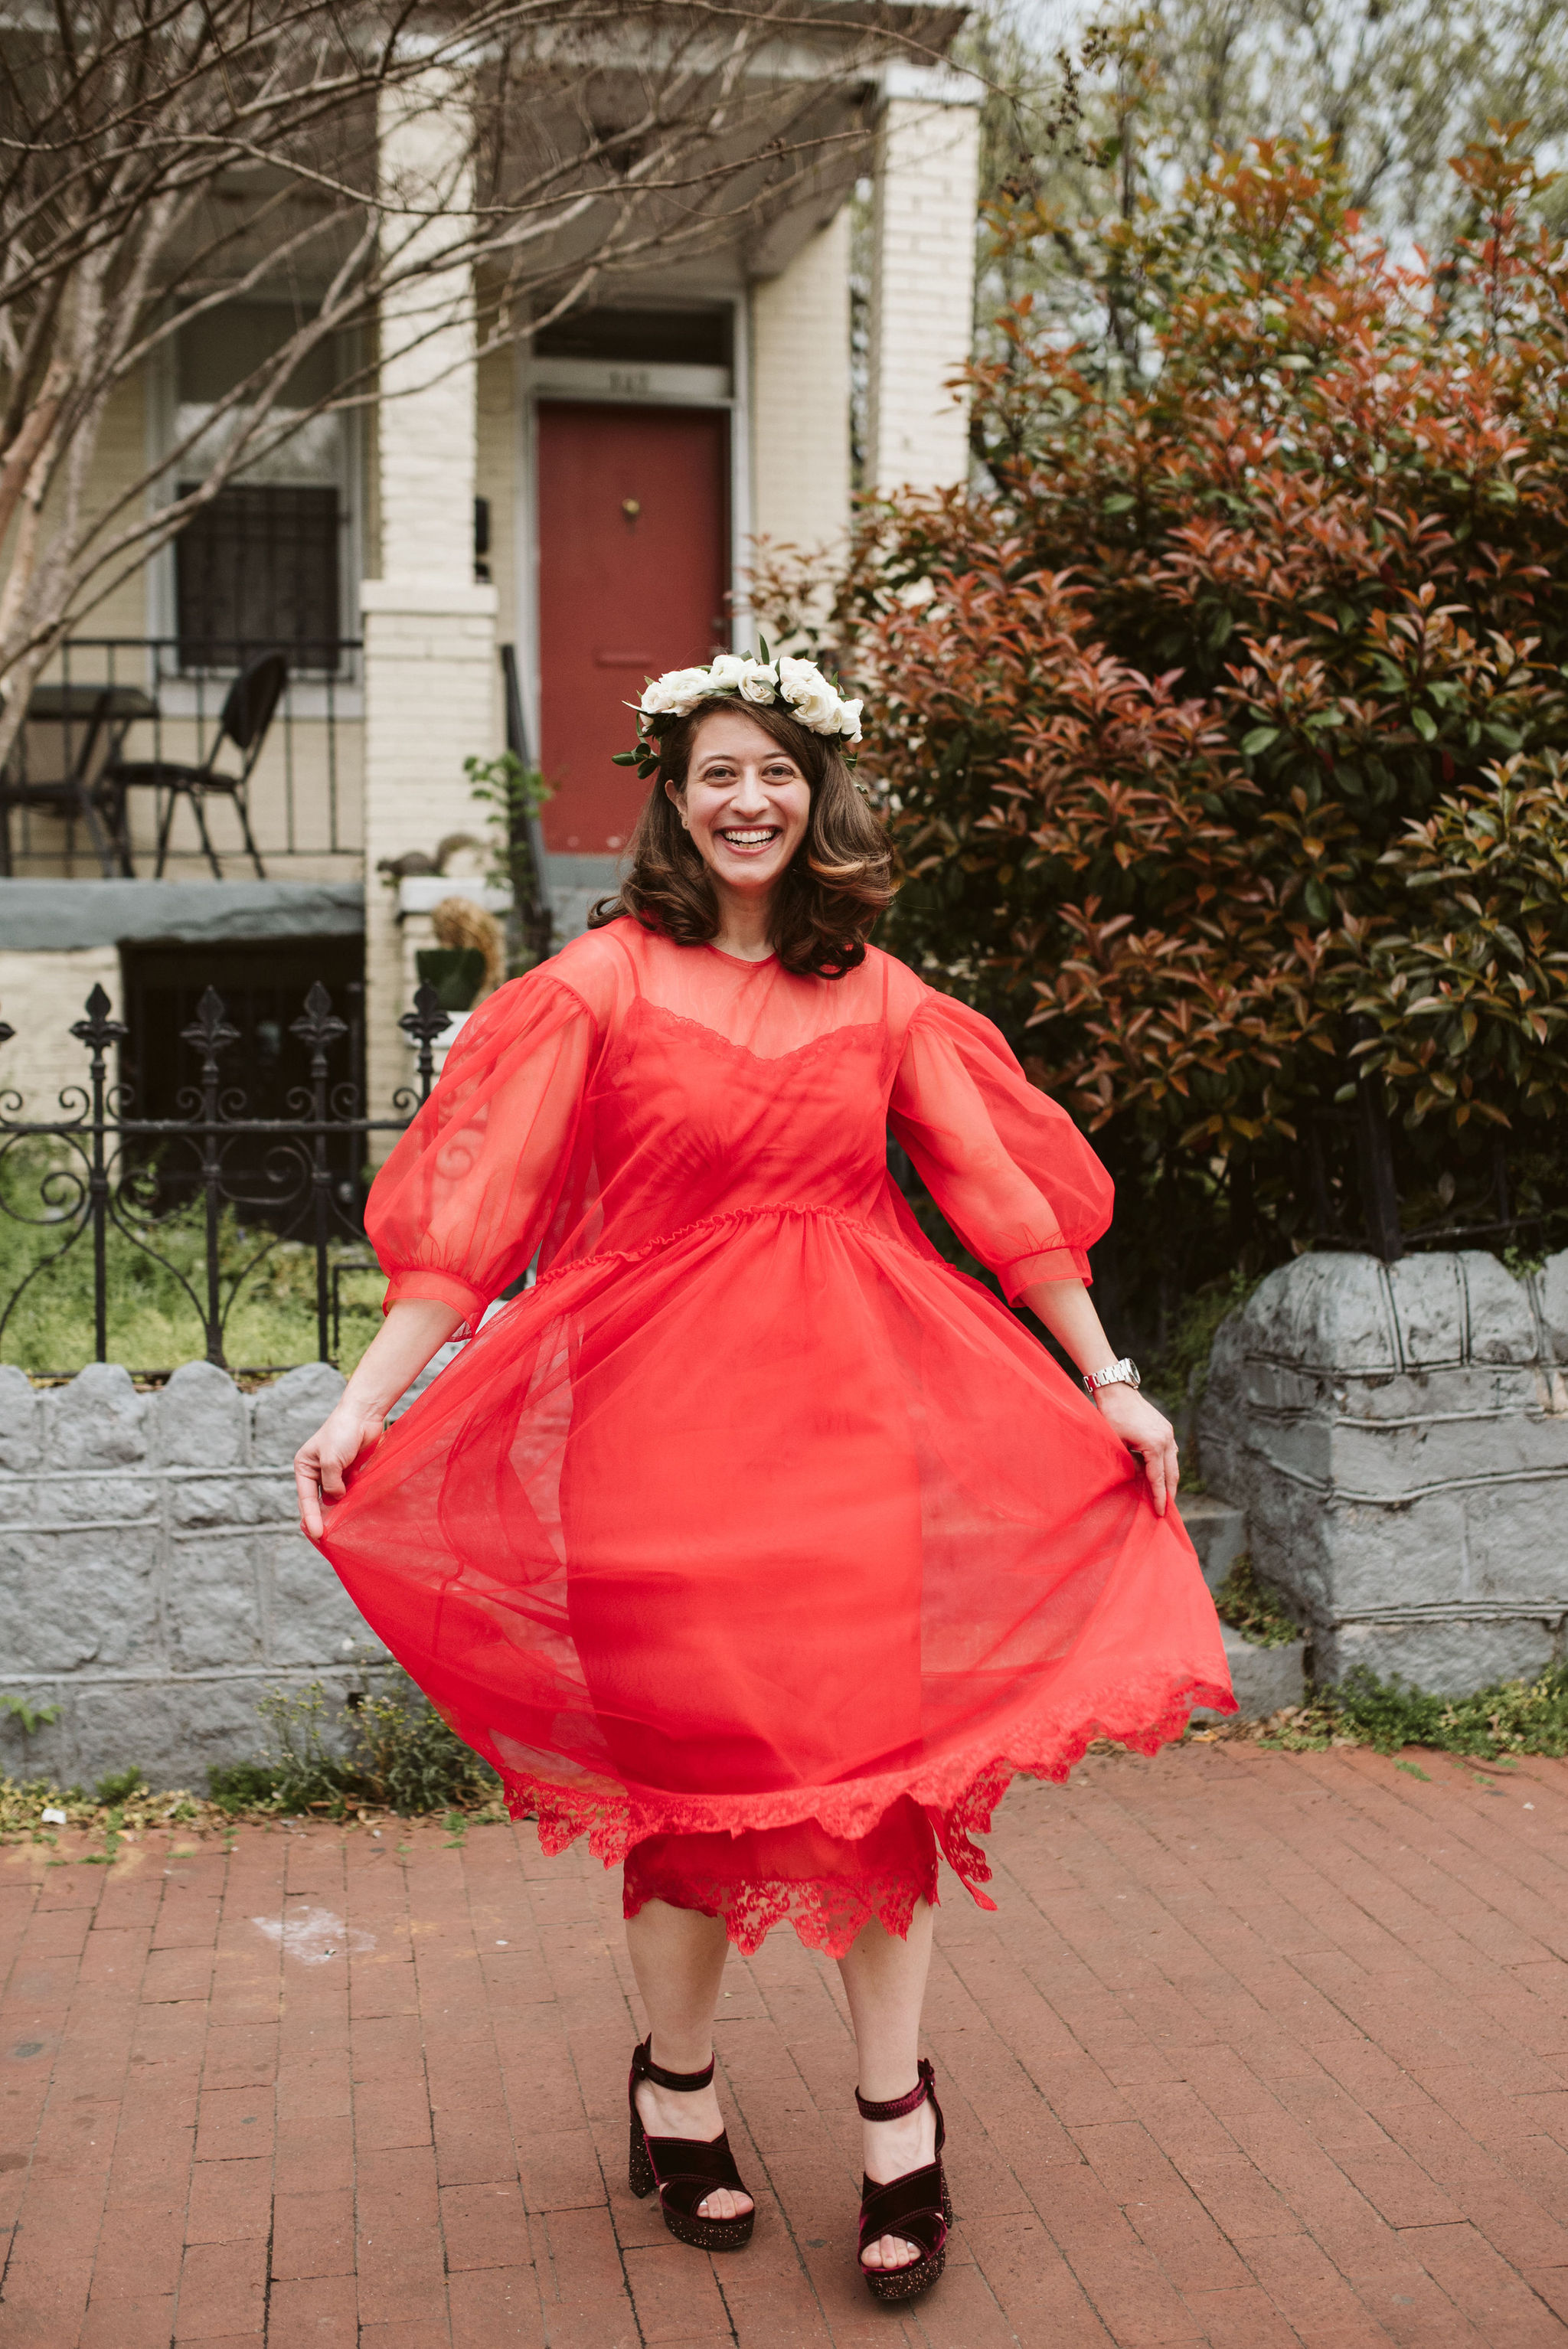  Washington DC, Baltimore Wedding Photographer, Intimate Wedding, Traditional, Classic, Palestinian, Portrait of Bride Twirling in Red Dress 